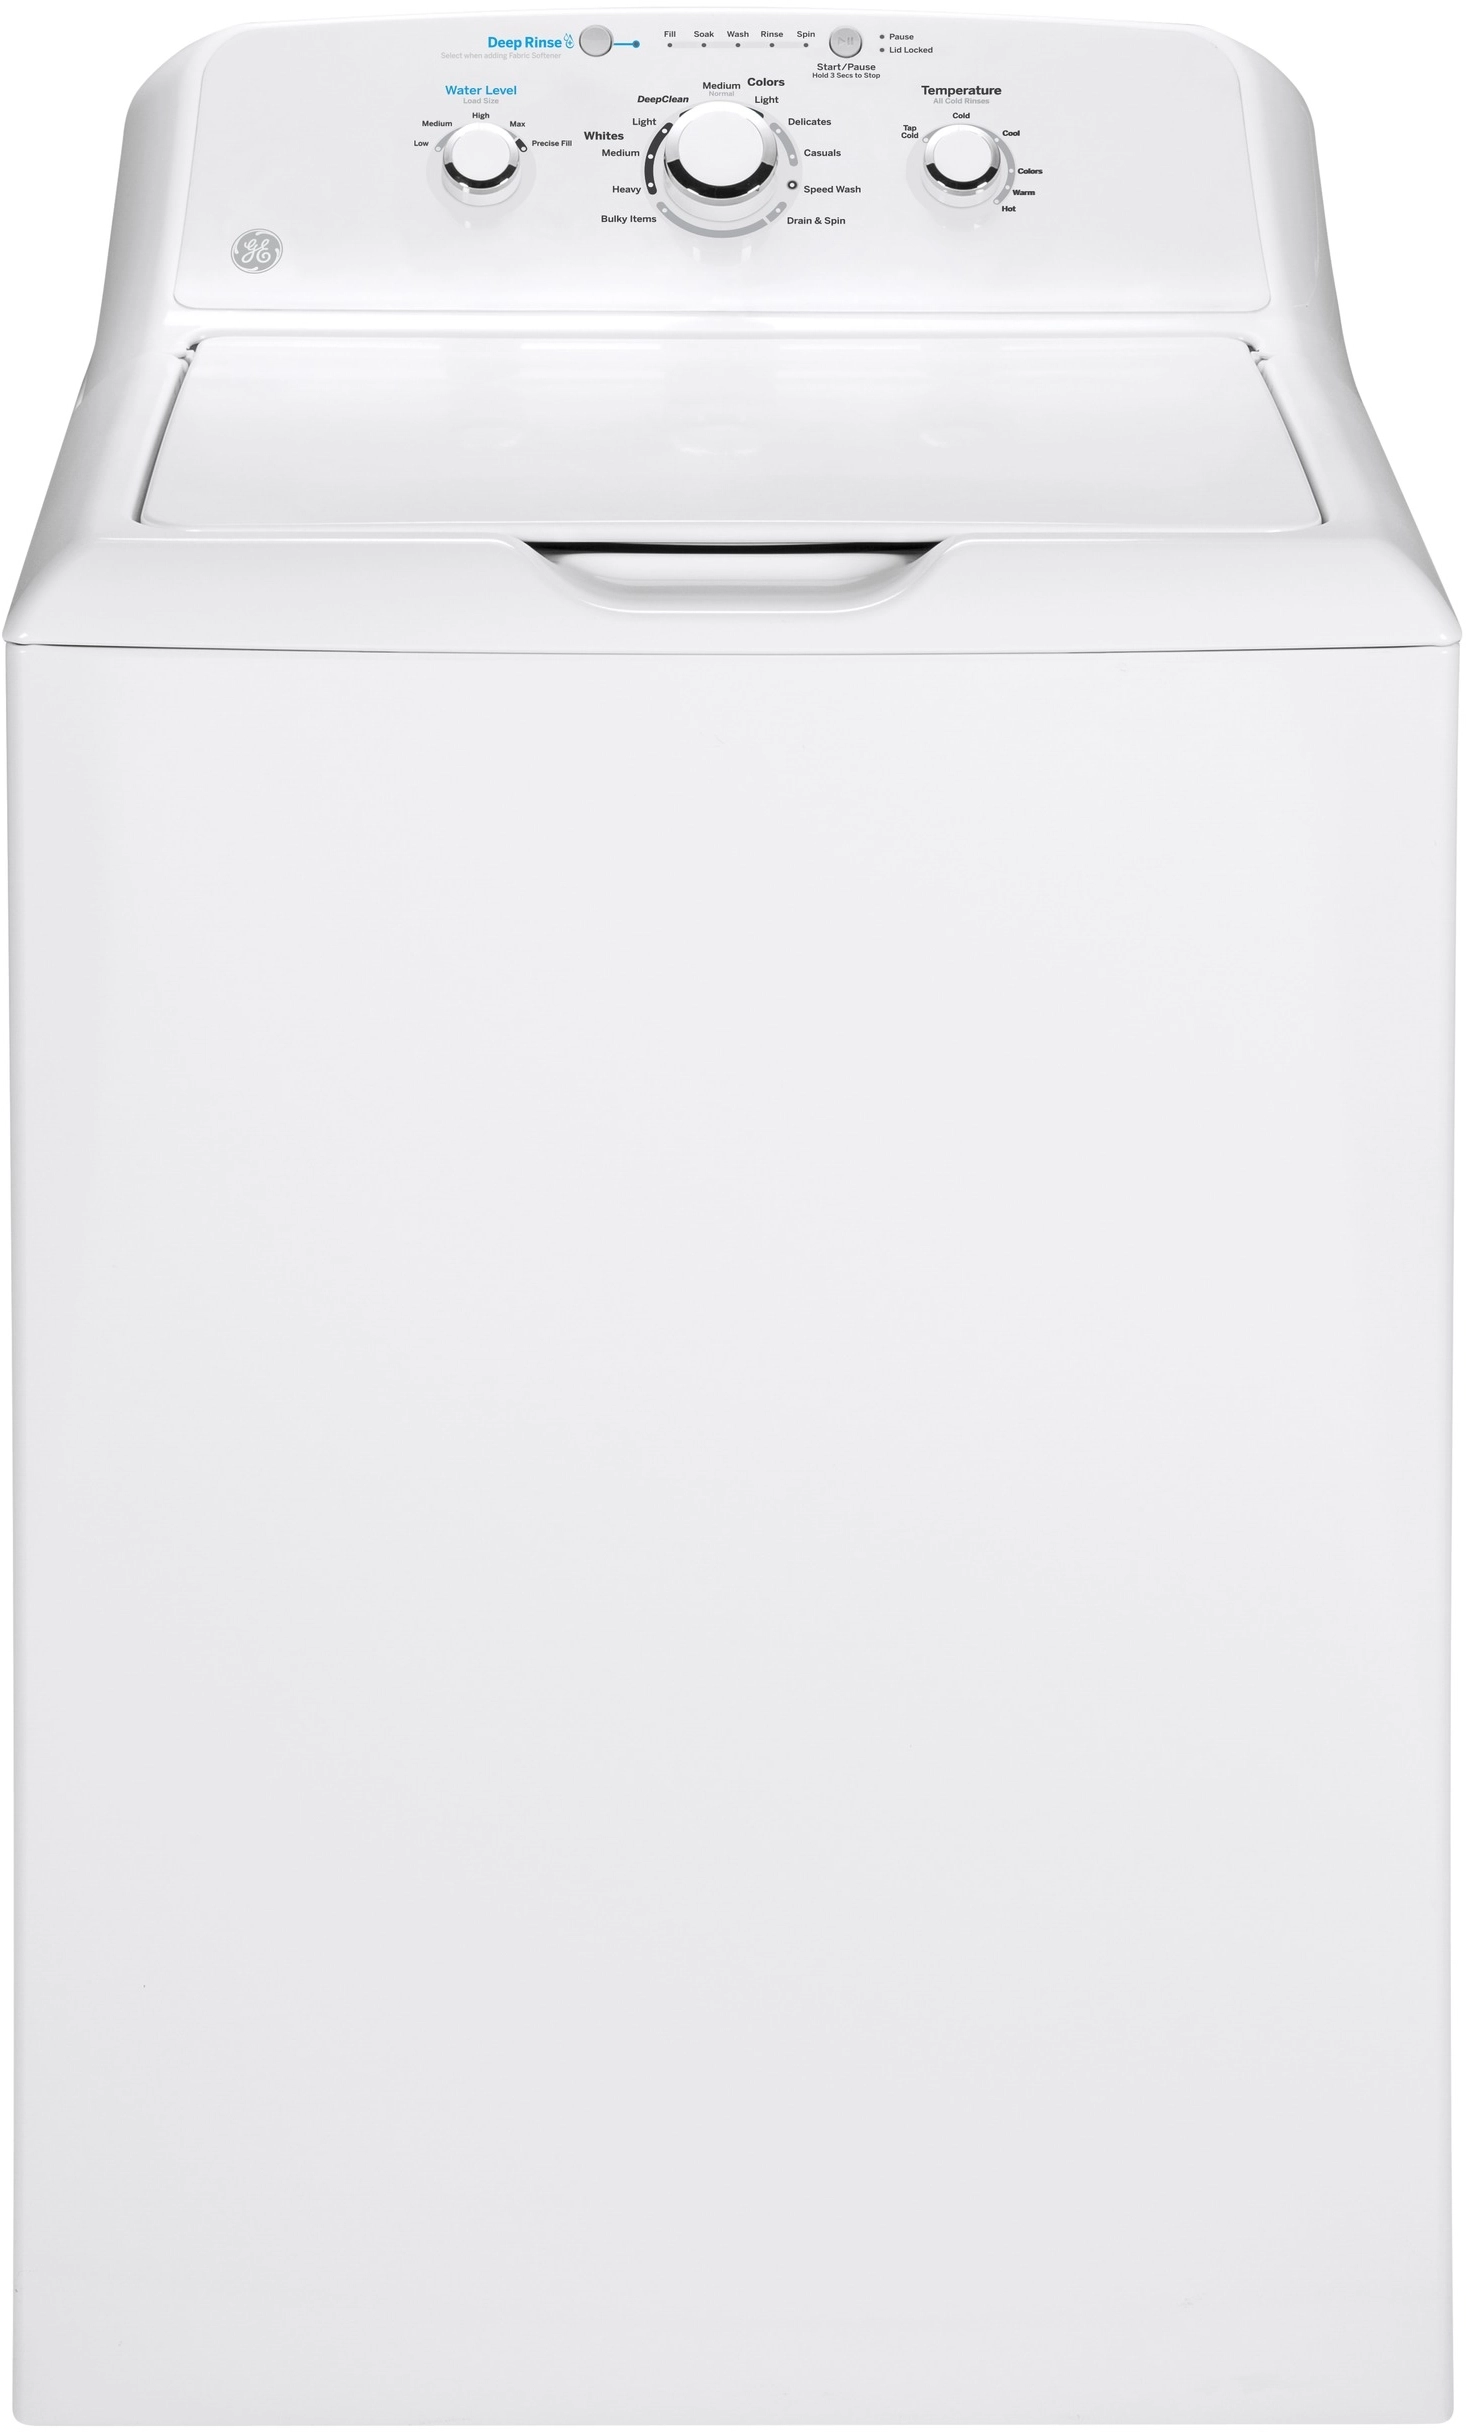 General Electric 27 Inch Top Load Washer with 11 Wash Cycles